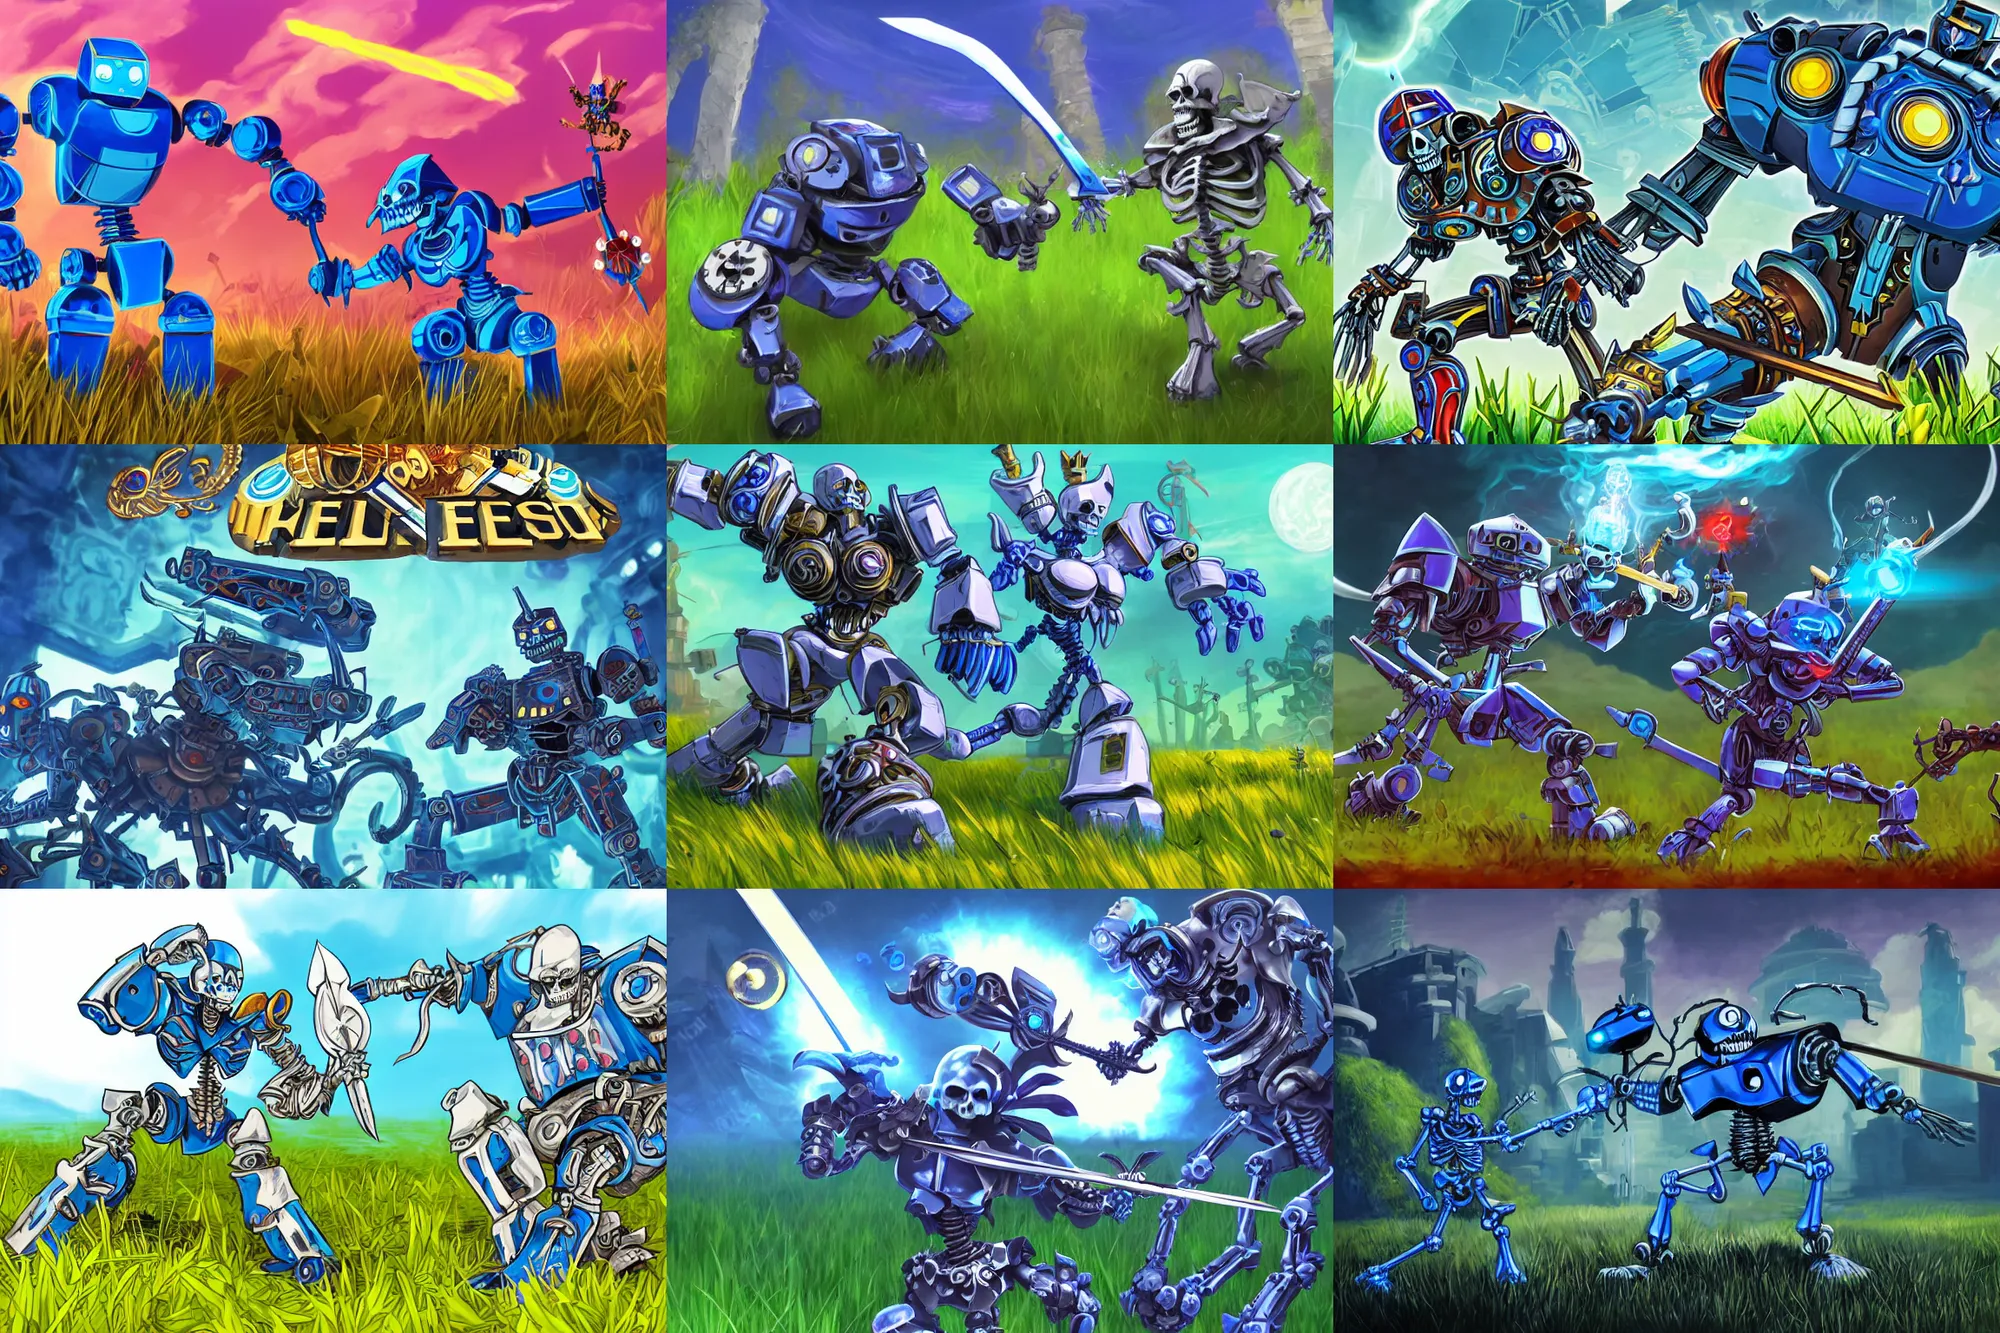 Prompt: a blue warrior robot with a slot machine reel chest, battling a skeleton with a sword. fantasy. promotional art for a video game on steam. casino. comic cartoon. battling in a grassy field. beautiful and simple.